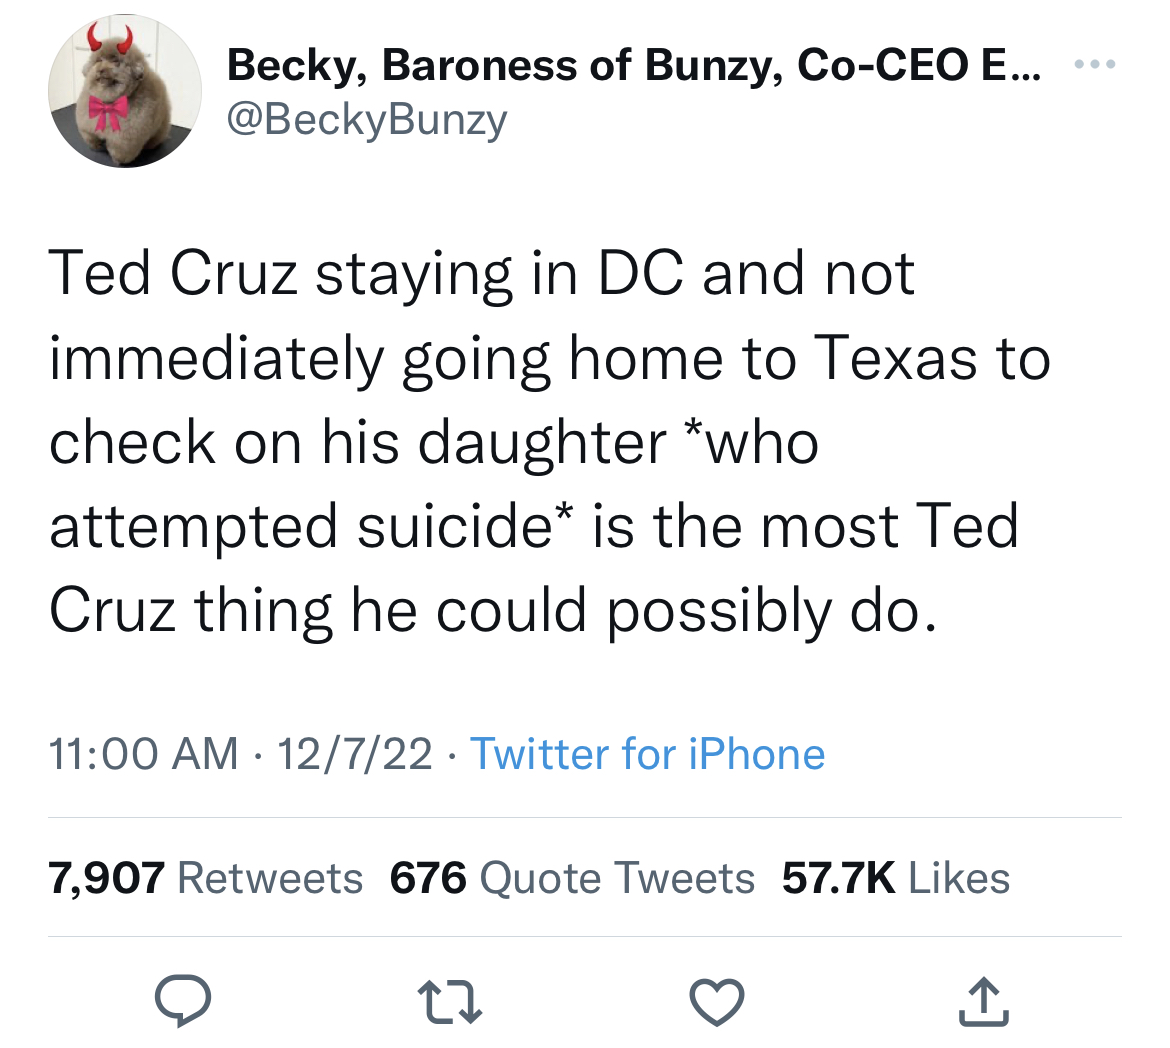 Tweets dunking on celebs - angle - Becky, Baroness of Bunzy, CoCeo E... Ted Cruz staying in Dc and not immediately going home to Texas to check on his daughter who attempted suicide is the most Ted Cruz thing he could possibly do. 12722 Twitter for iPhone